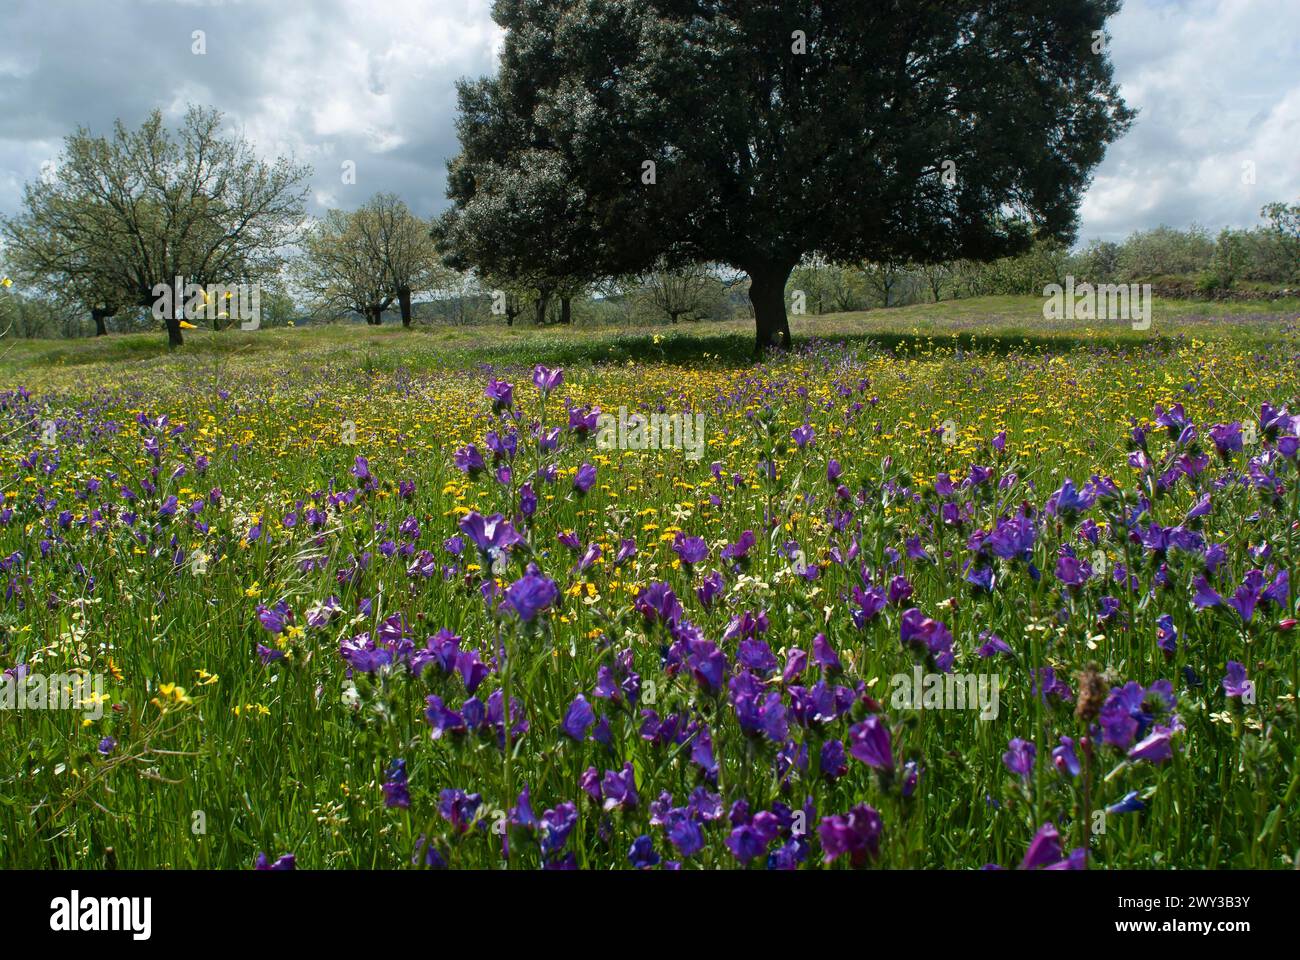 Holm oaks (Quercus ilex) with flowering meadow, Extremadura, Spain Stock Photo